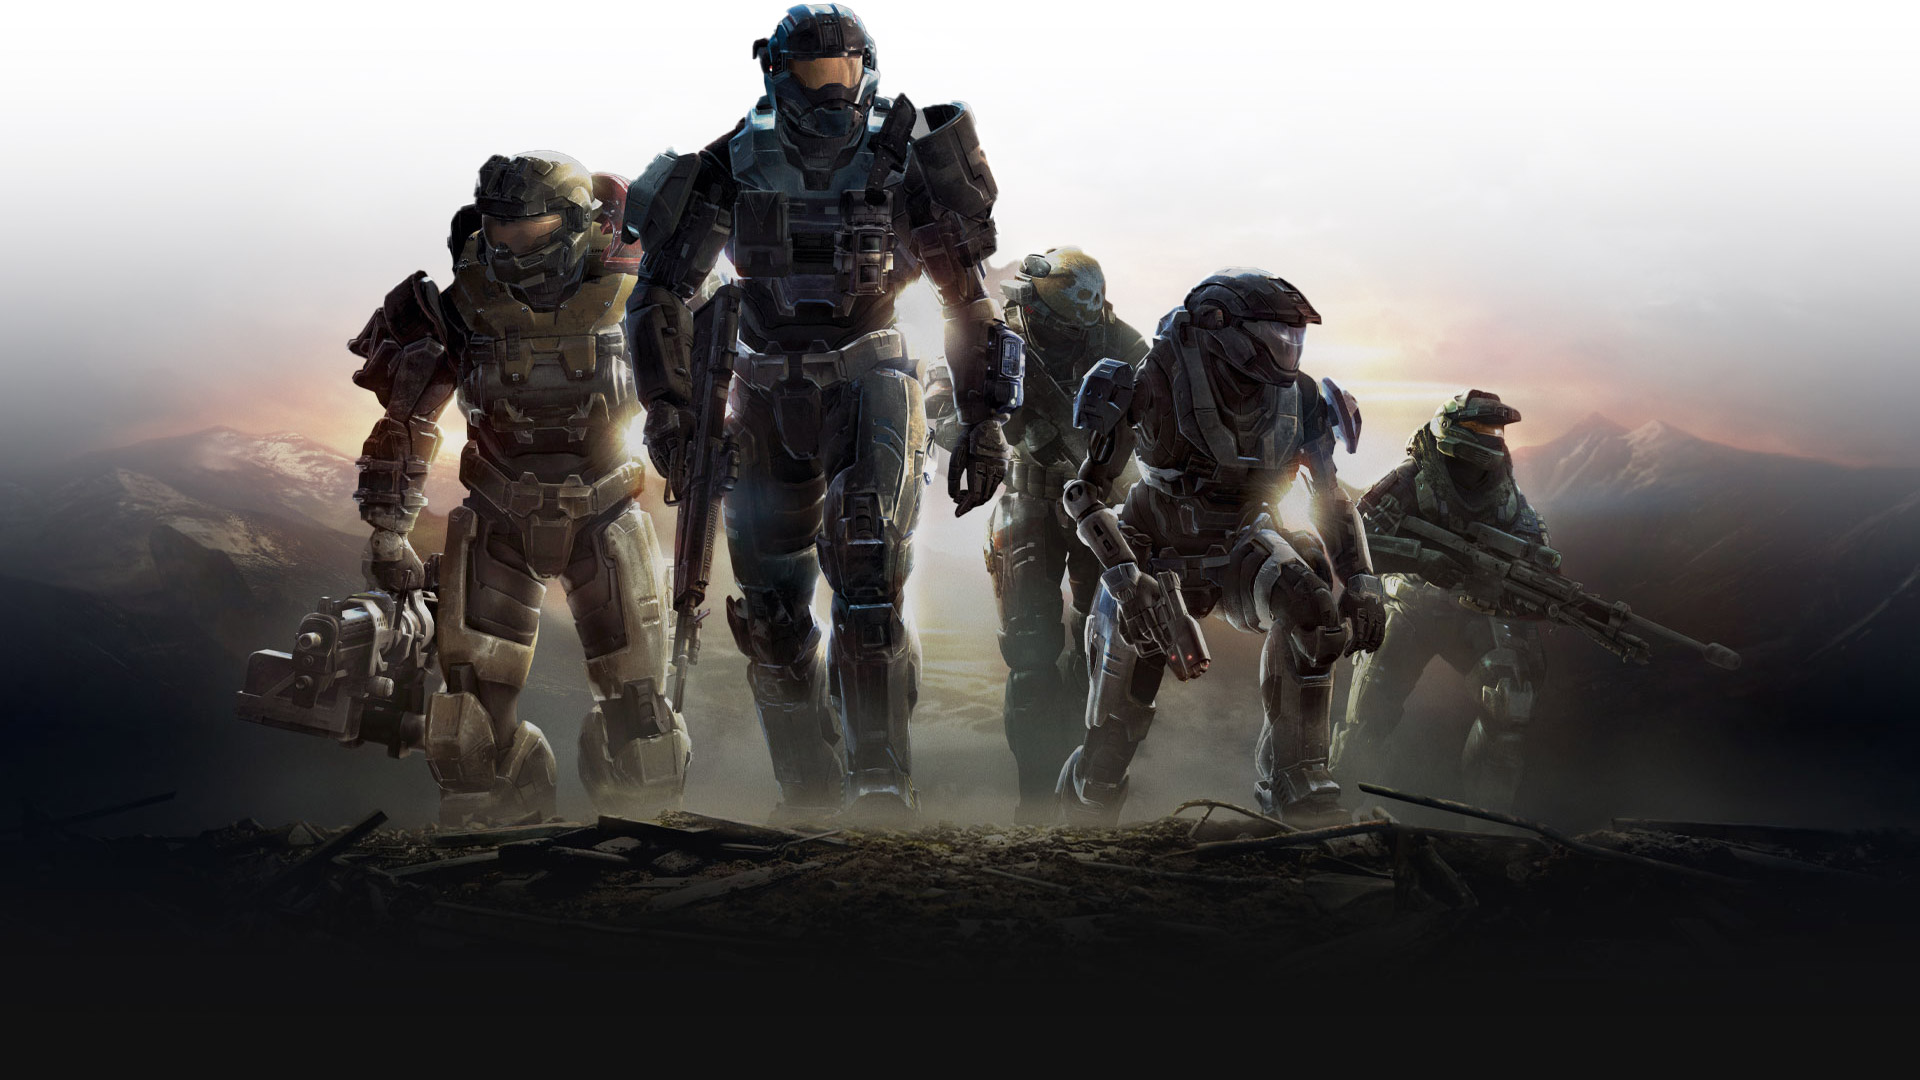 Spartans from Halo Reach walk up a hill with weapons ready